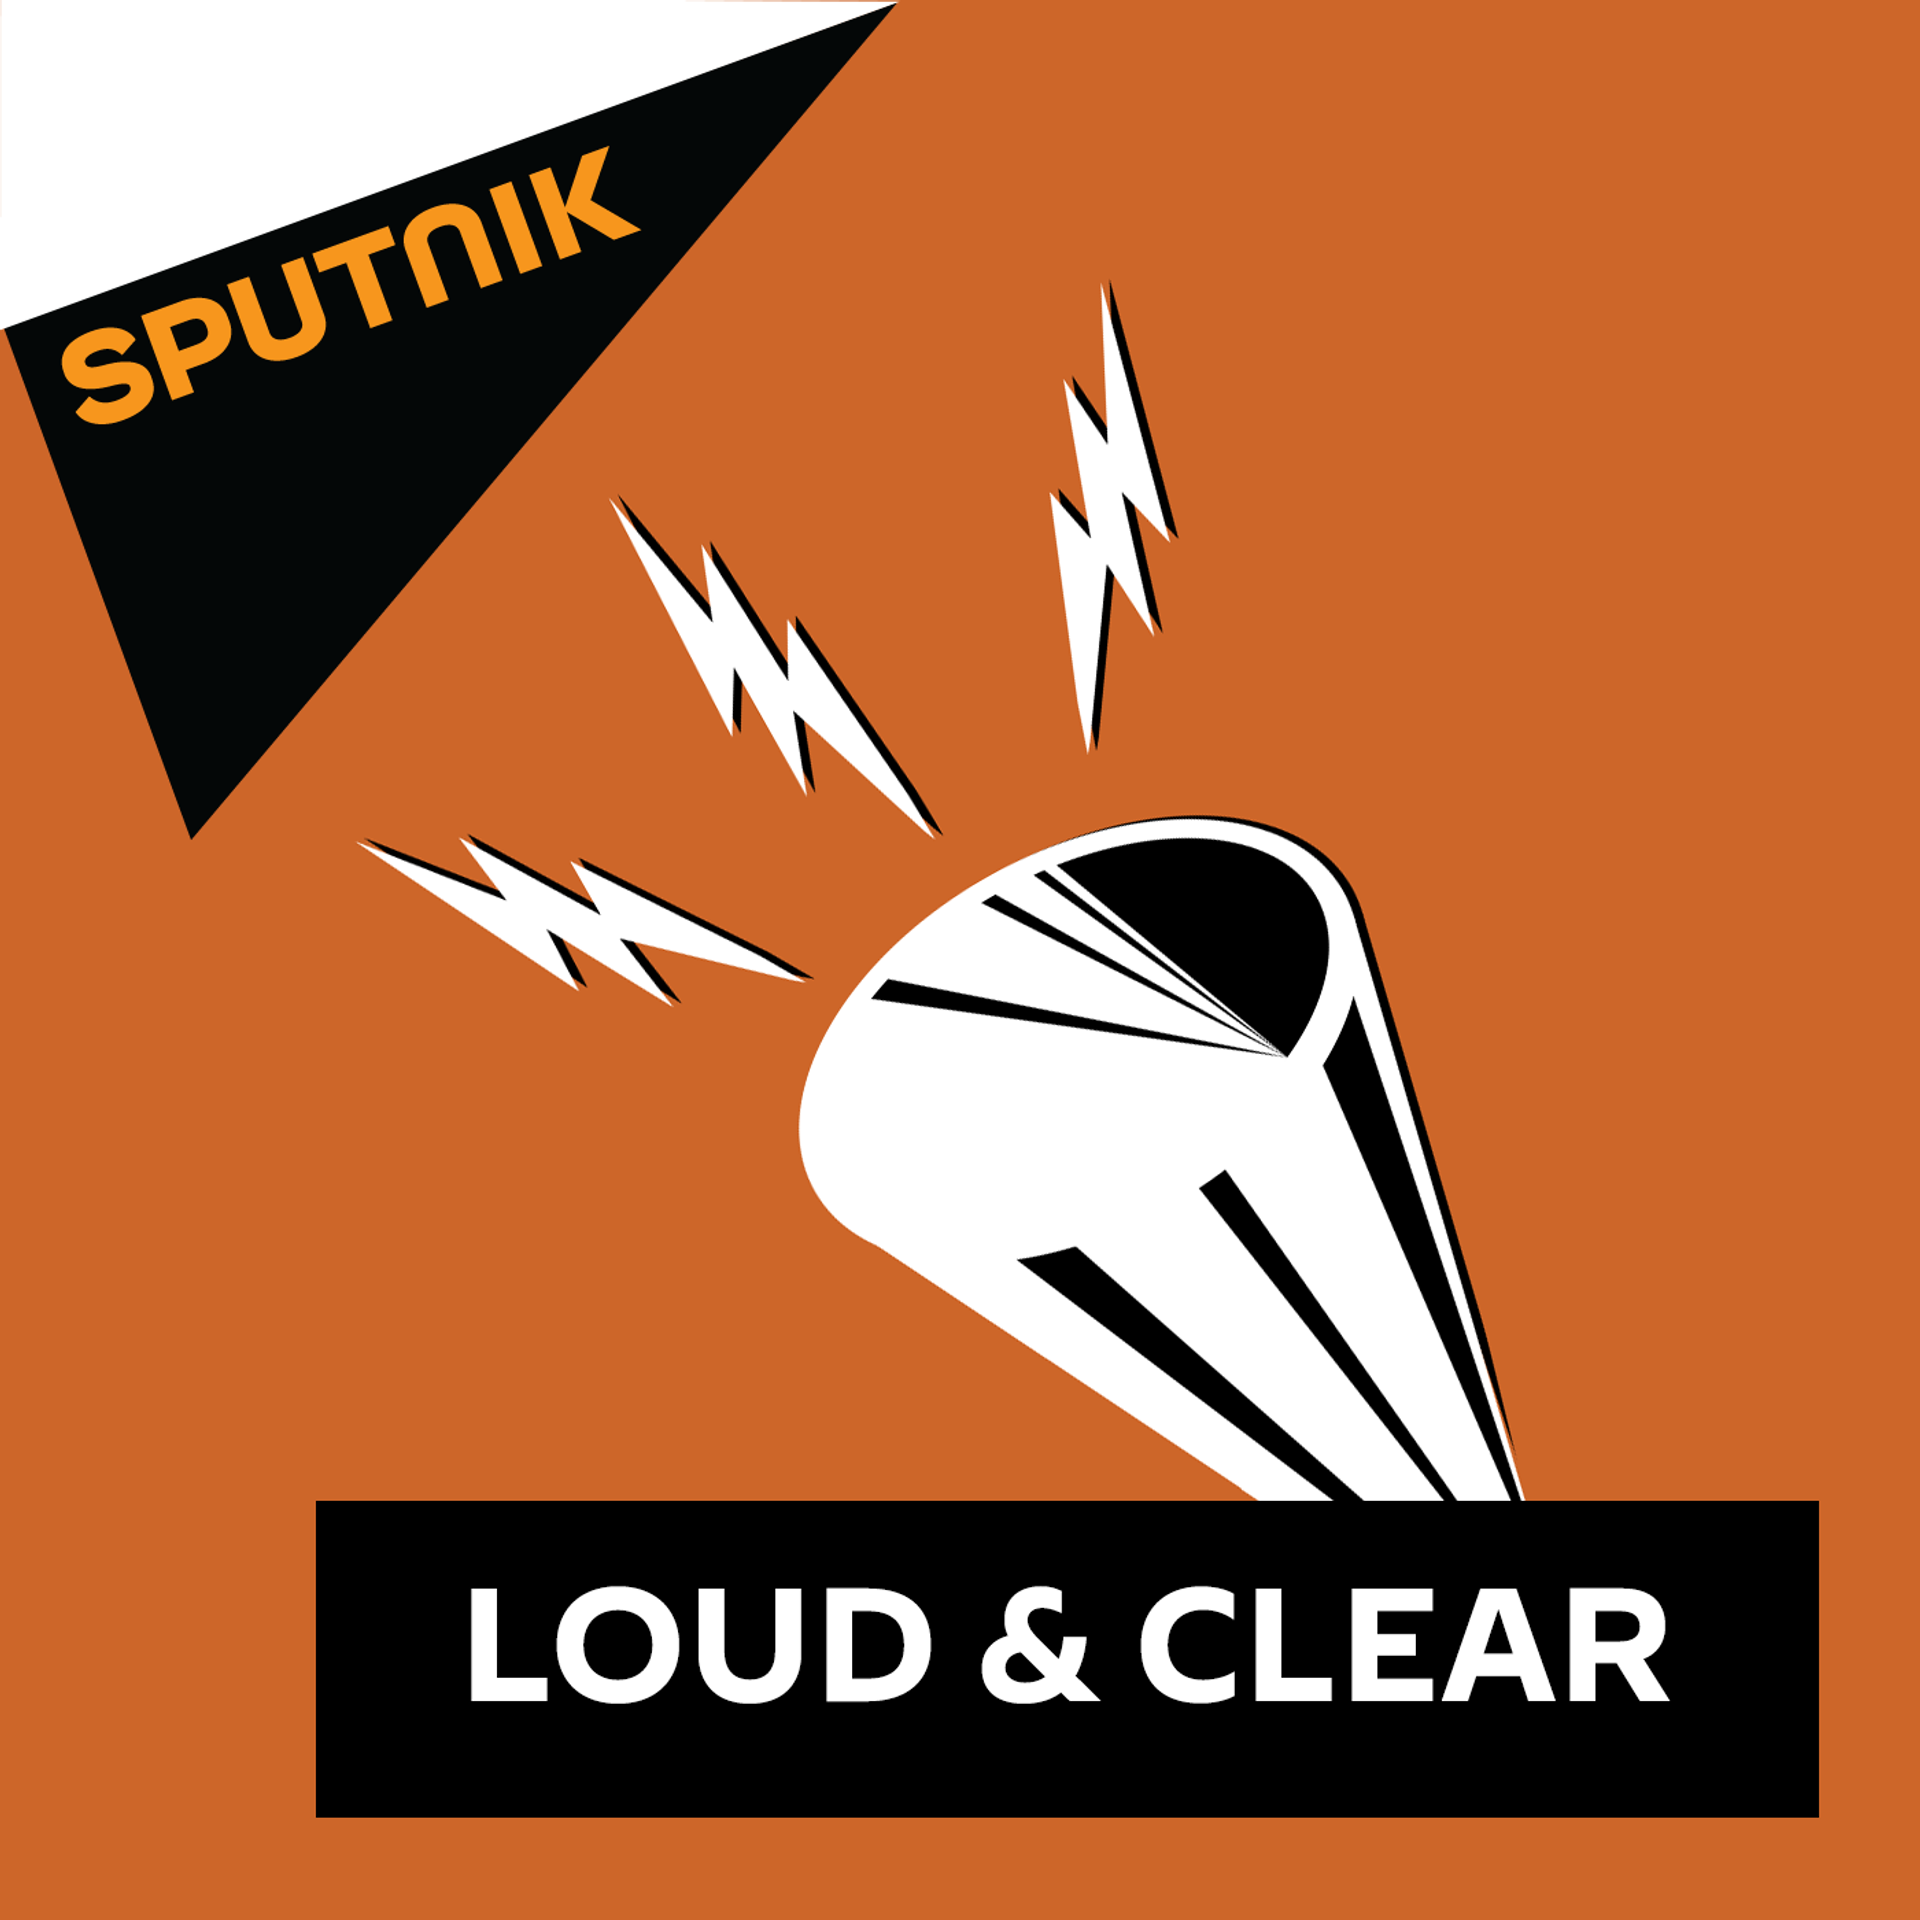 5:5 Loud and Clear. Autograph Loud and Clear. Signal - Loud & Clear. Loud and clear